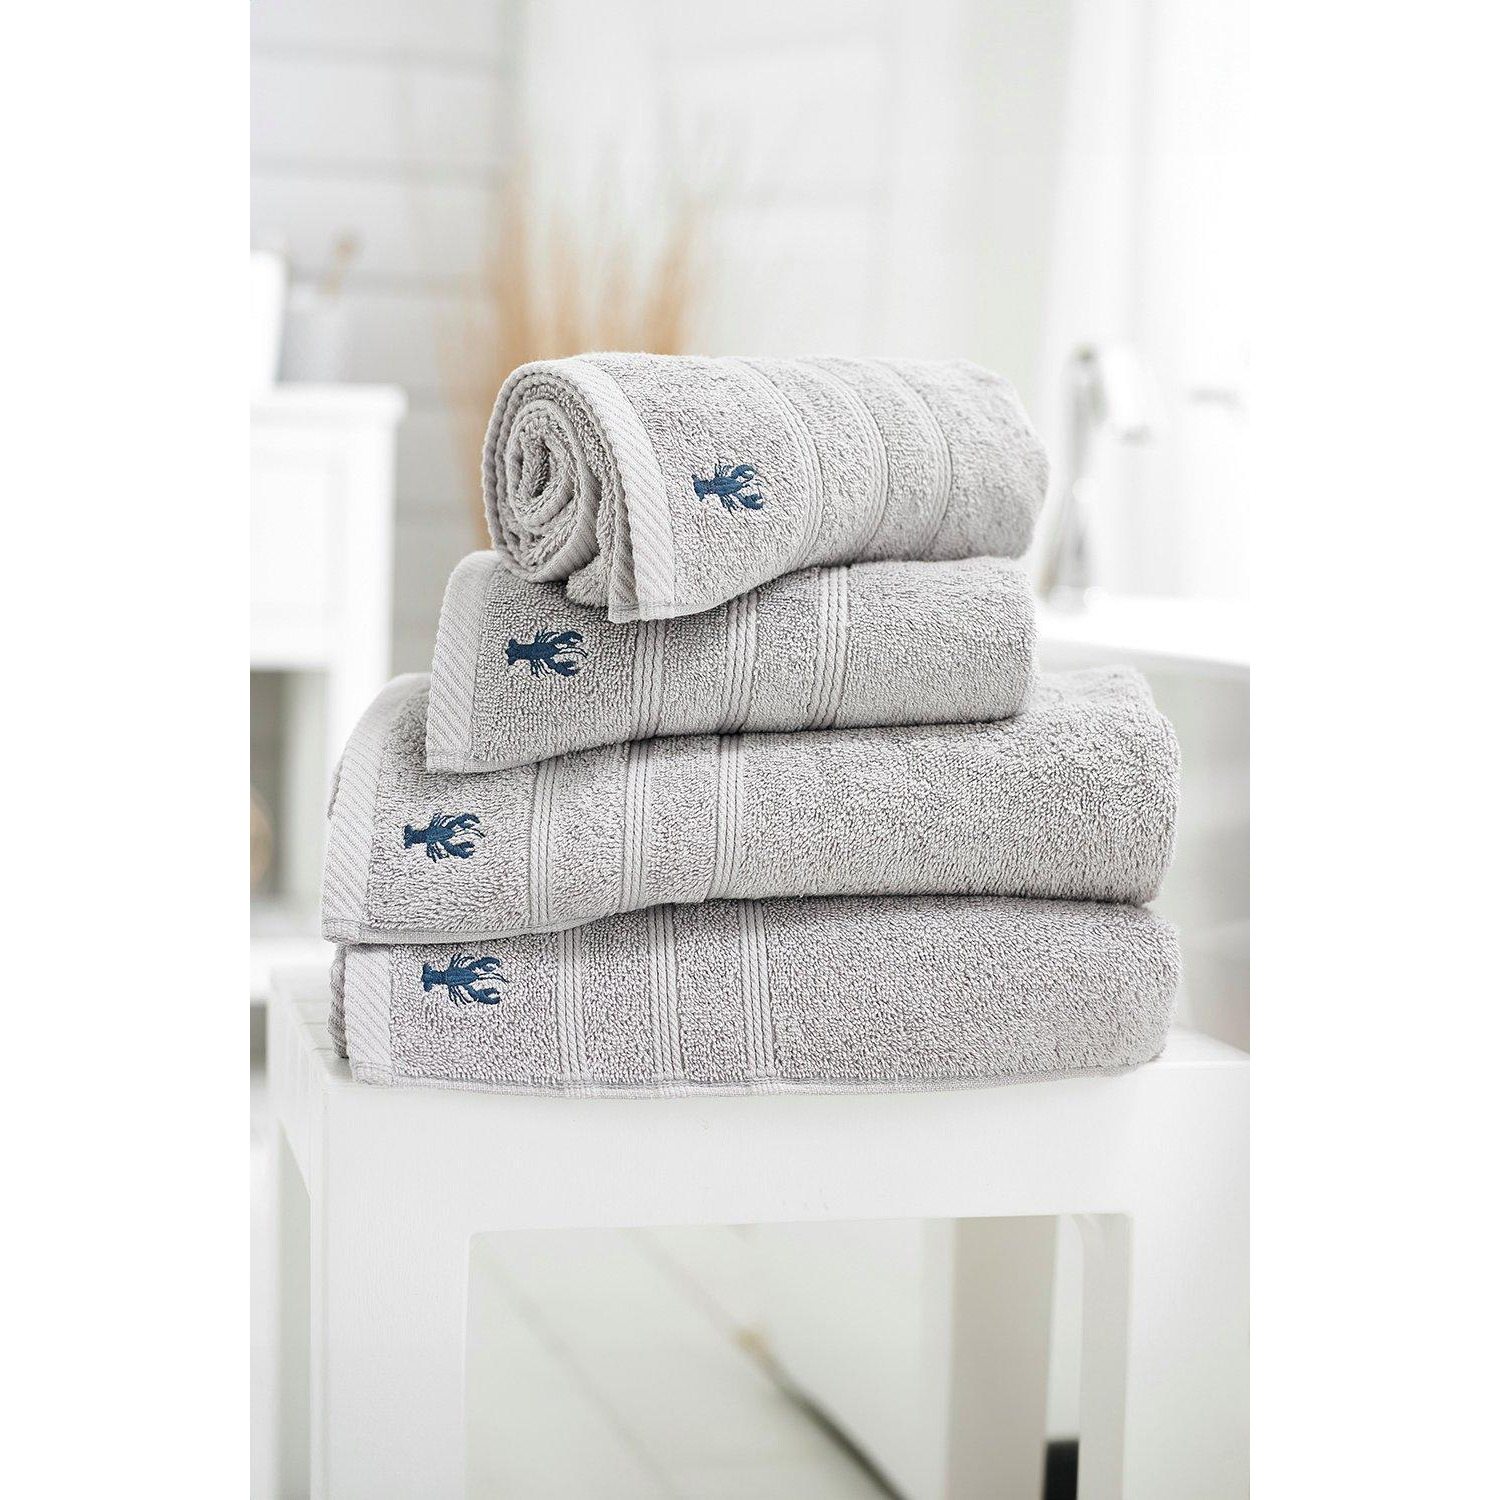 Kaleidoscope 550gsm Combed Cotton Towels - image 1